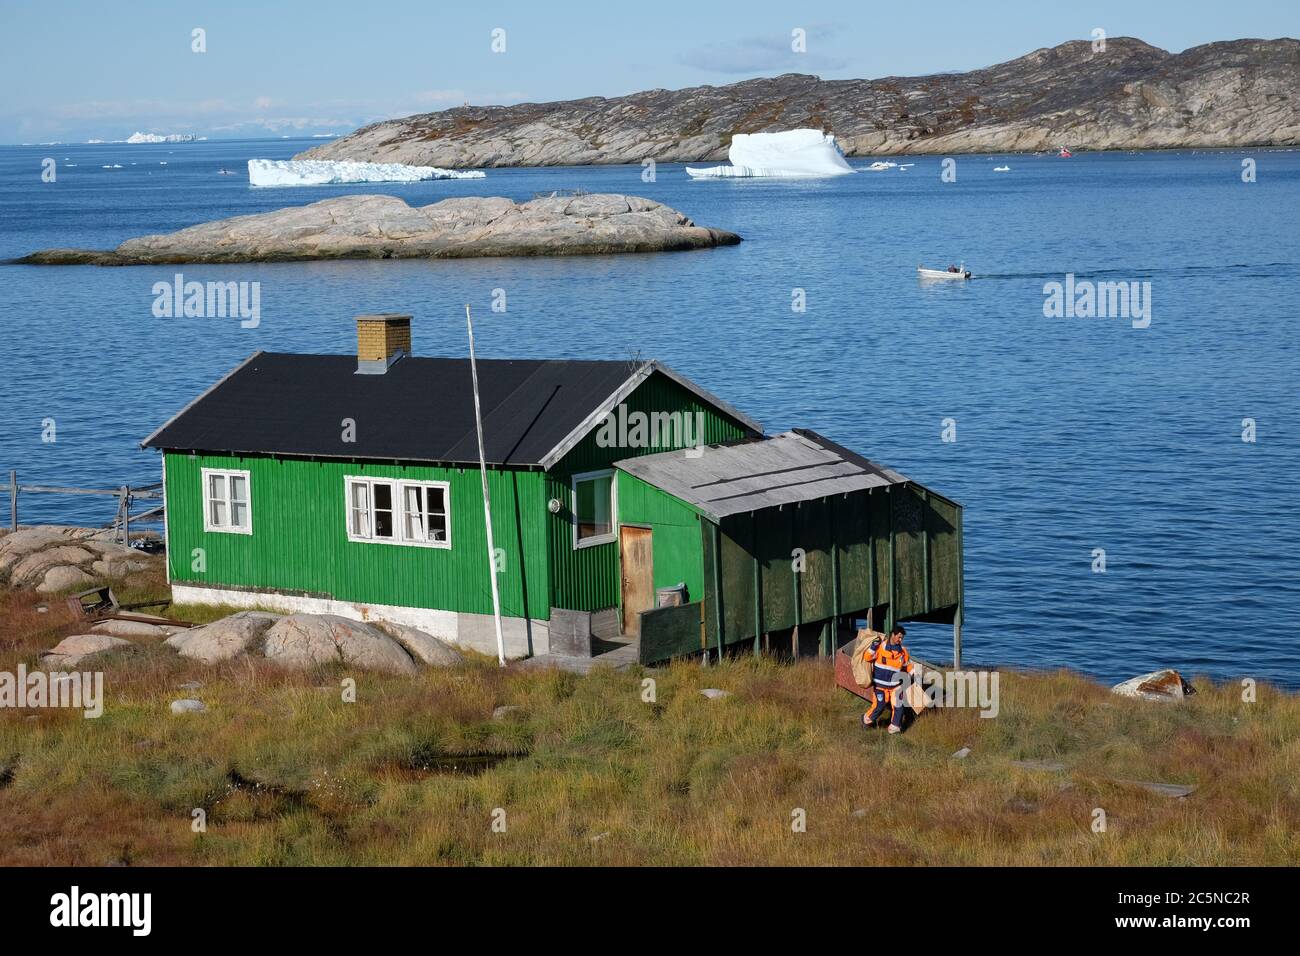 Brightly dressed workman collects the garbage from a small green house perched on the rocks which is dwarfed by huge icebergs floating by. Stock Photo